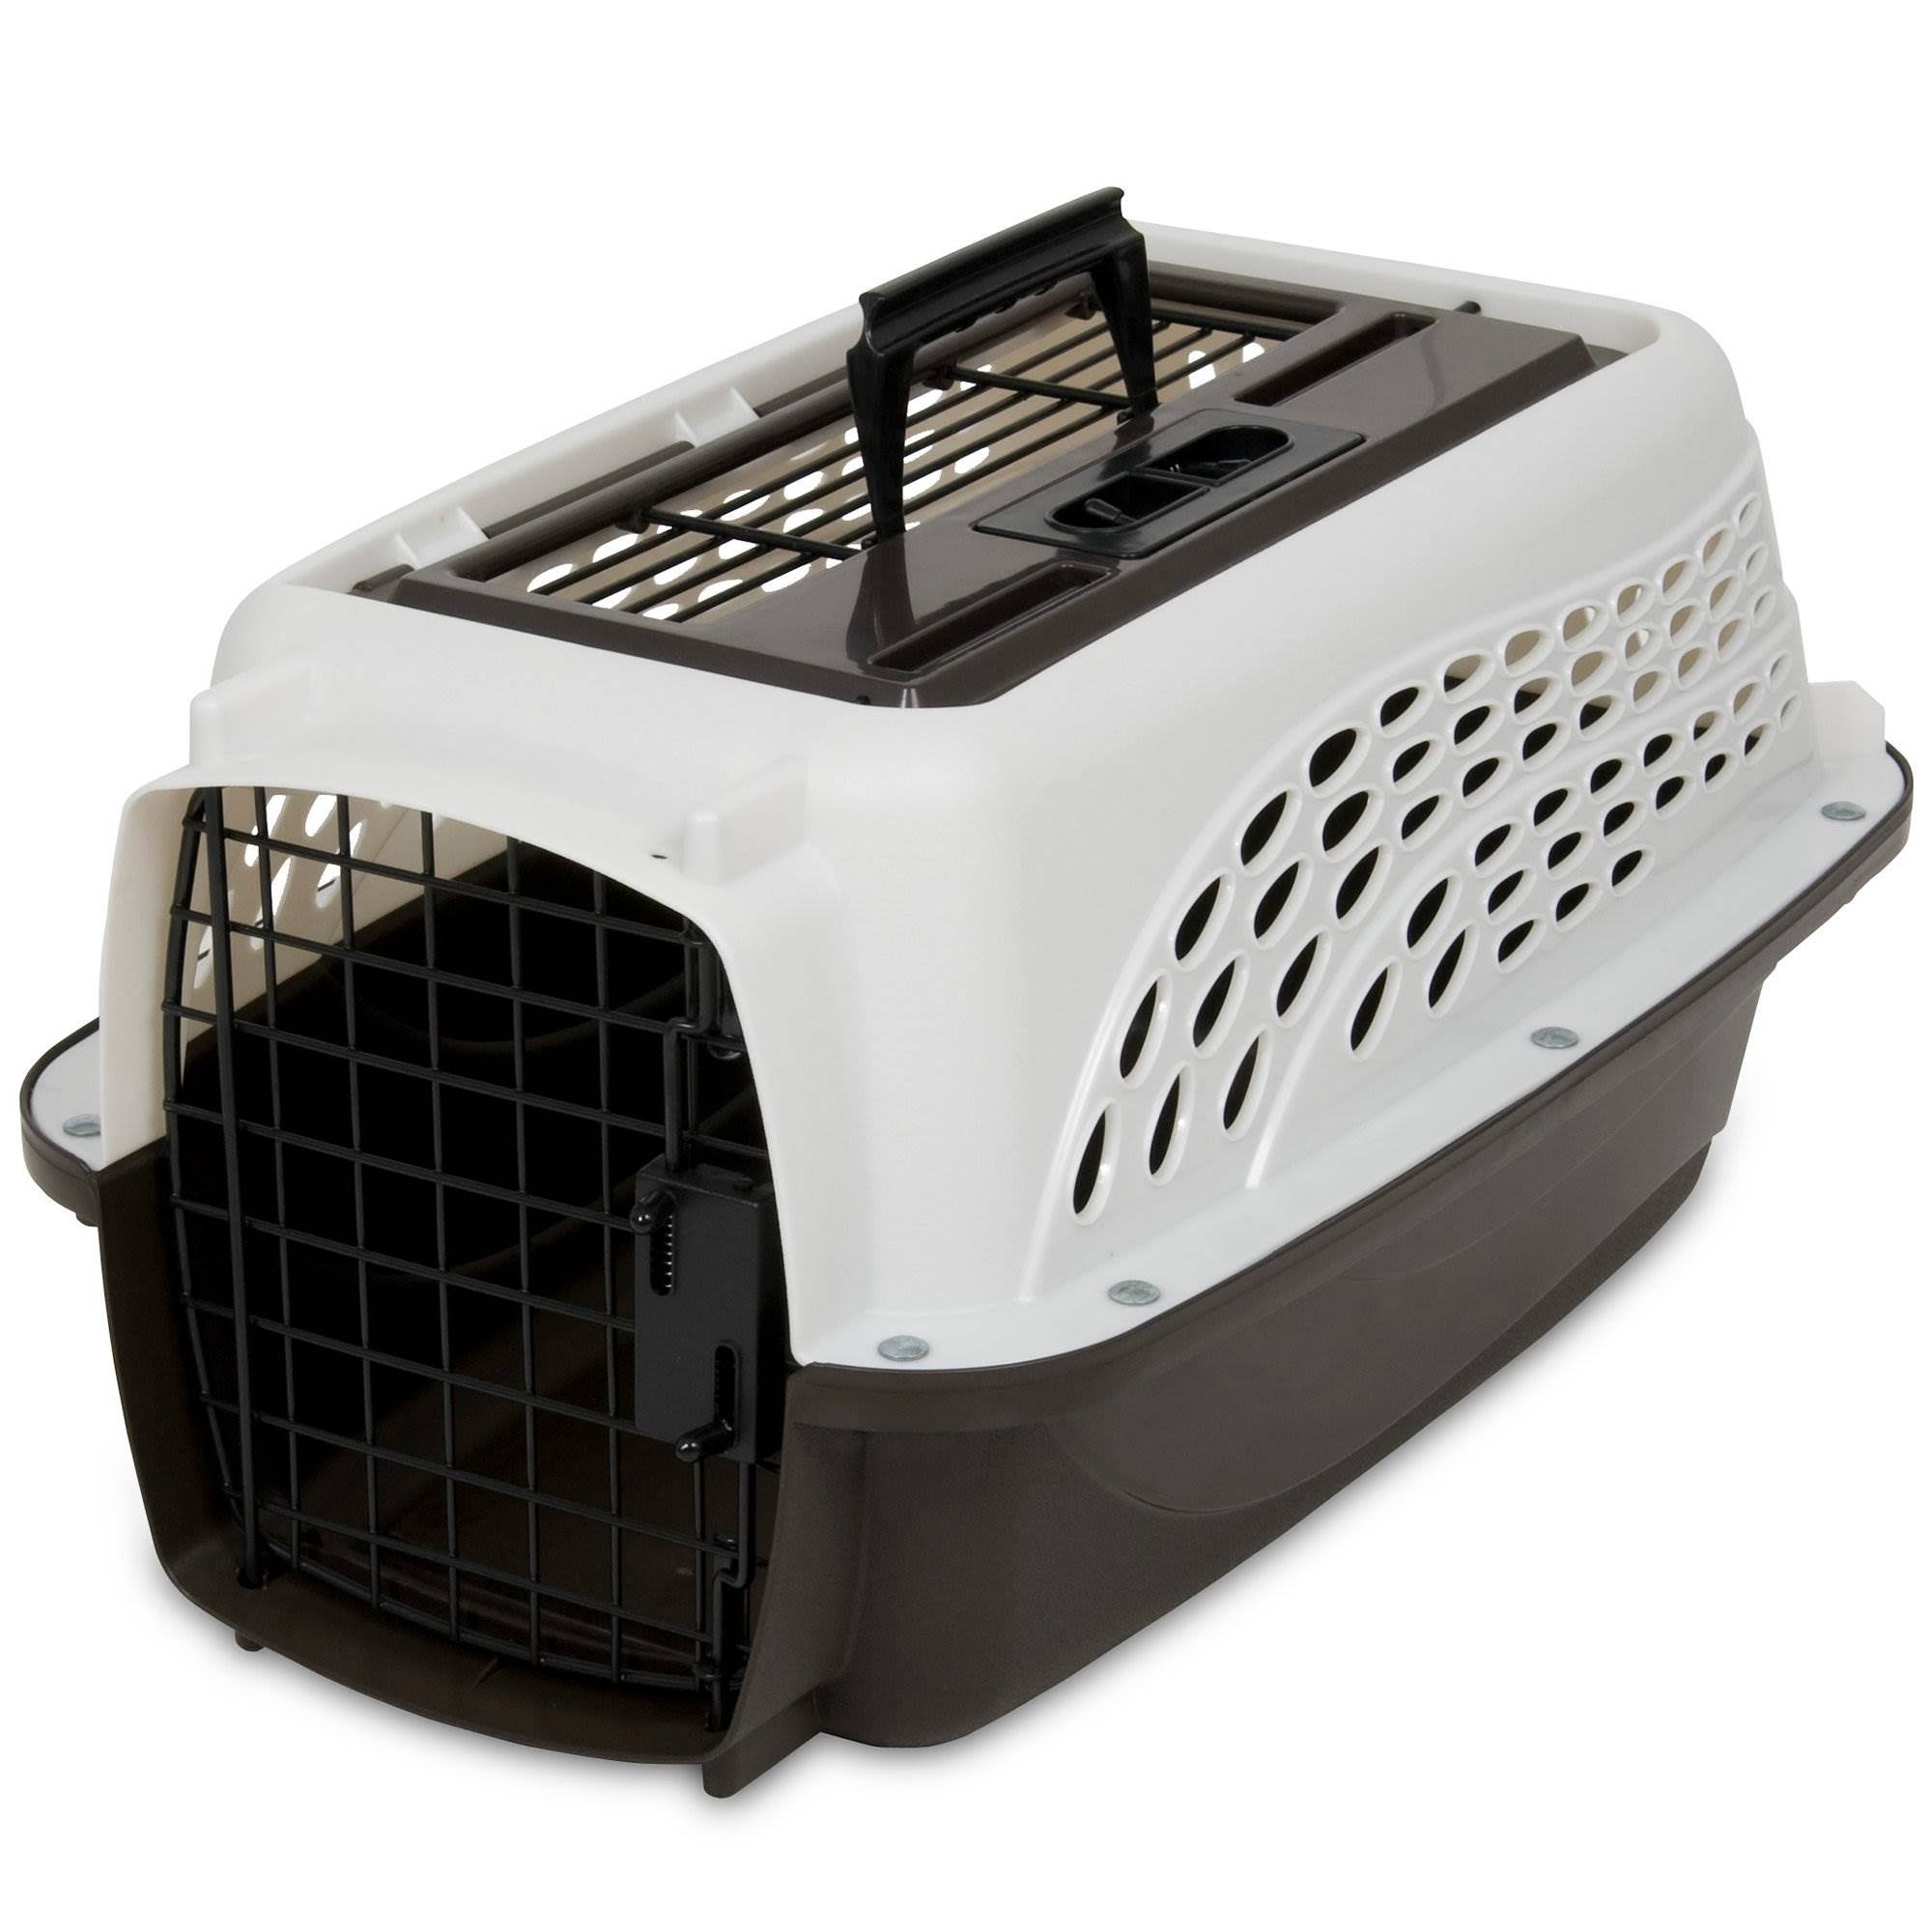 Petmate 2 Door Top Load Kennel Crate Carrier - Pearl White, 19"